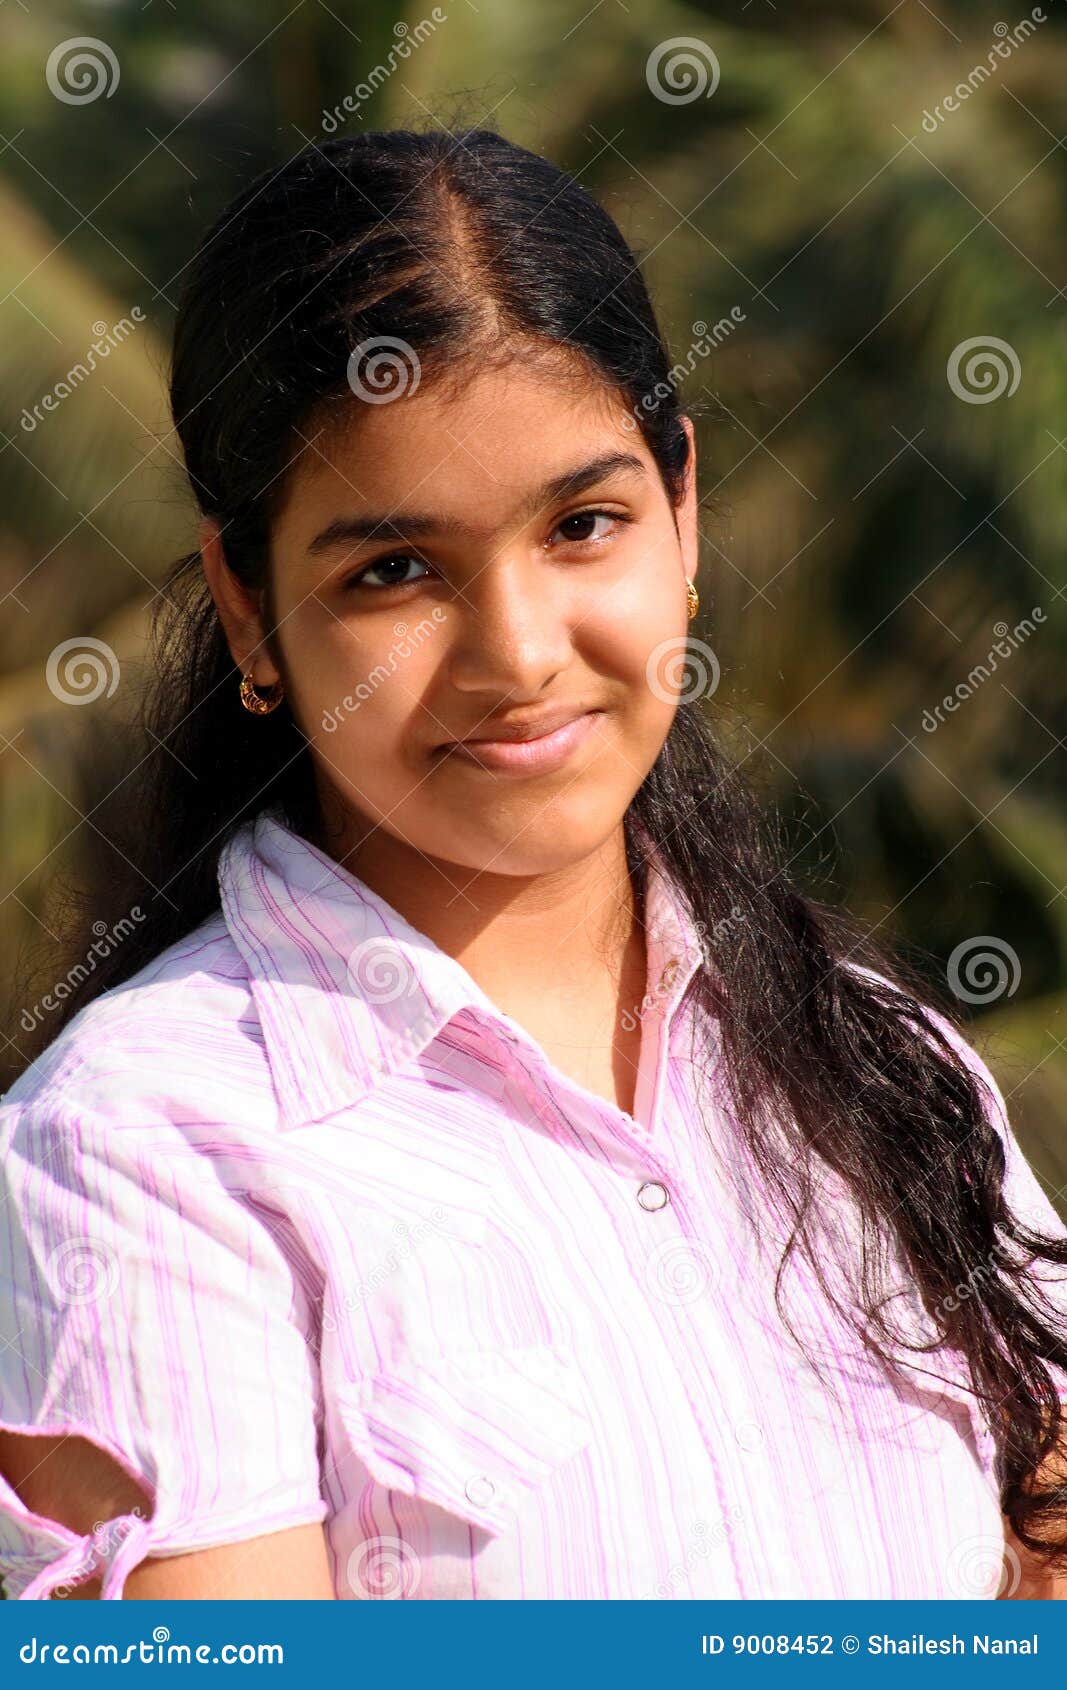 che ismail add college girl images photo